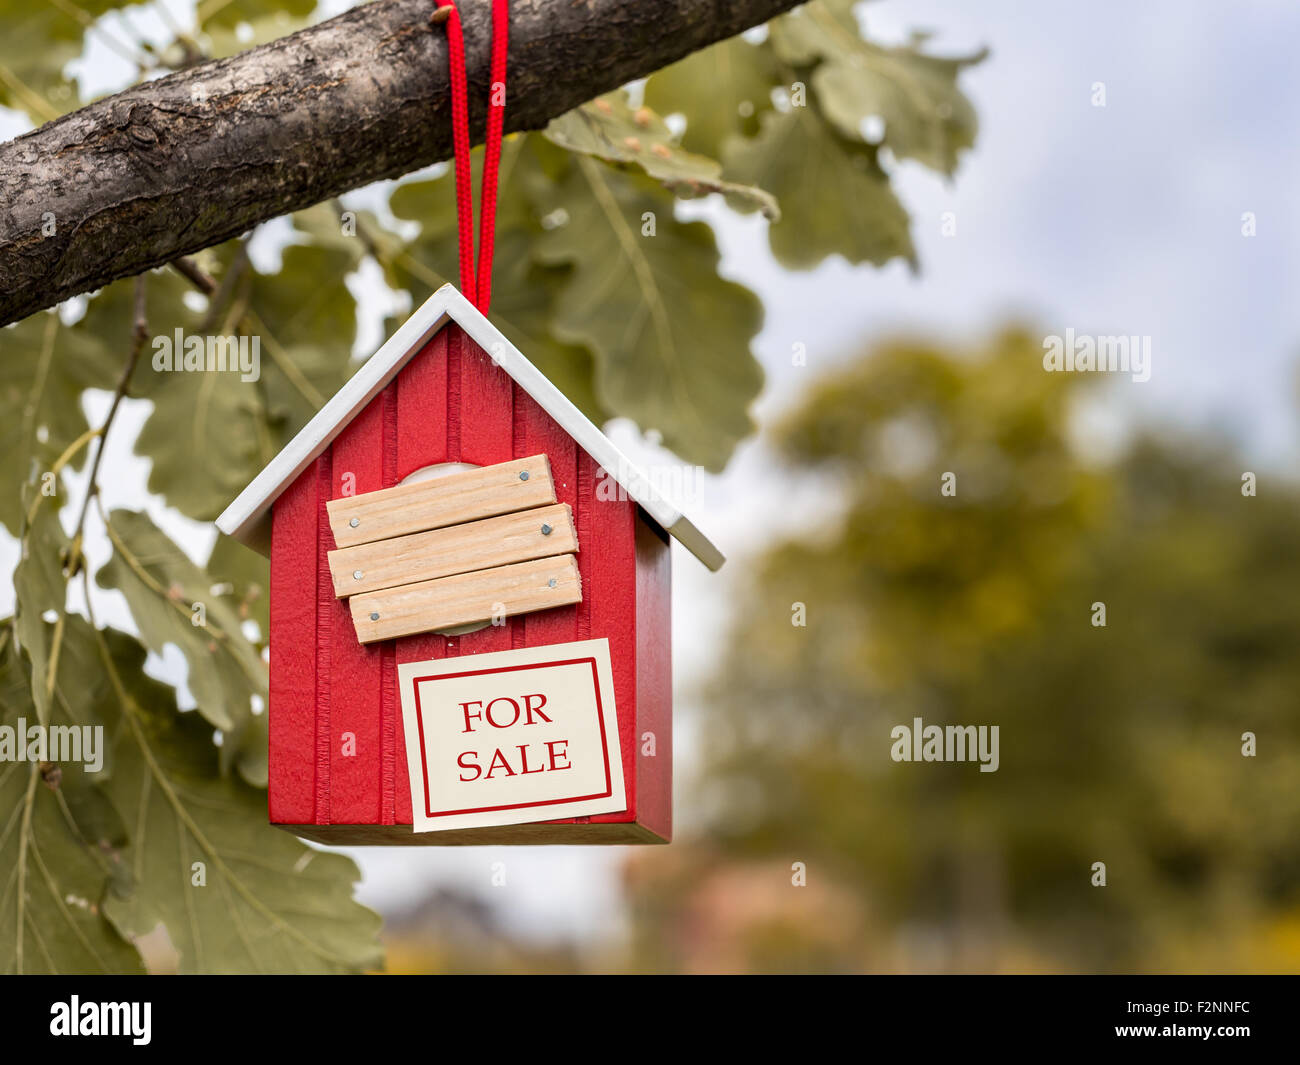 Wooden red birdhouse hanging on tree branch with entry hole covered with planks and note FOR SALE attached to it Stock Photo